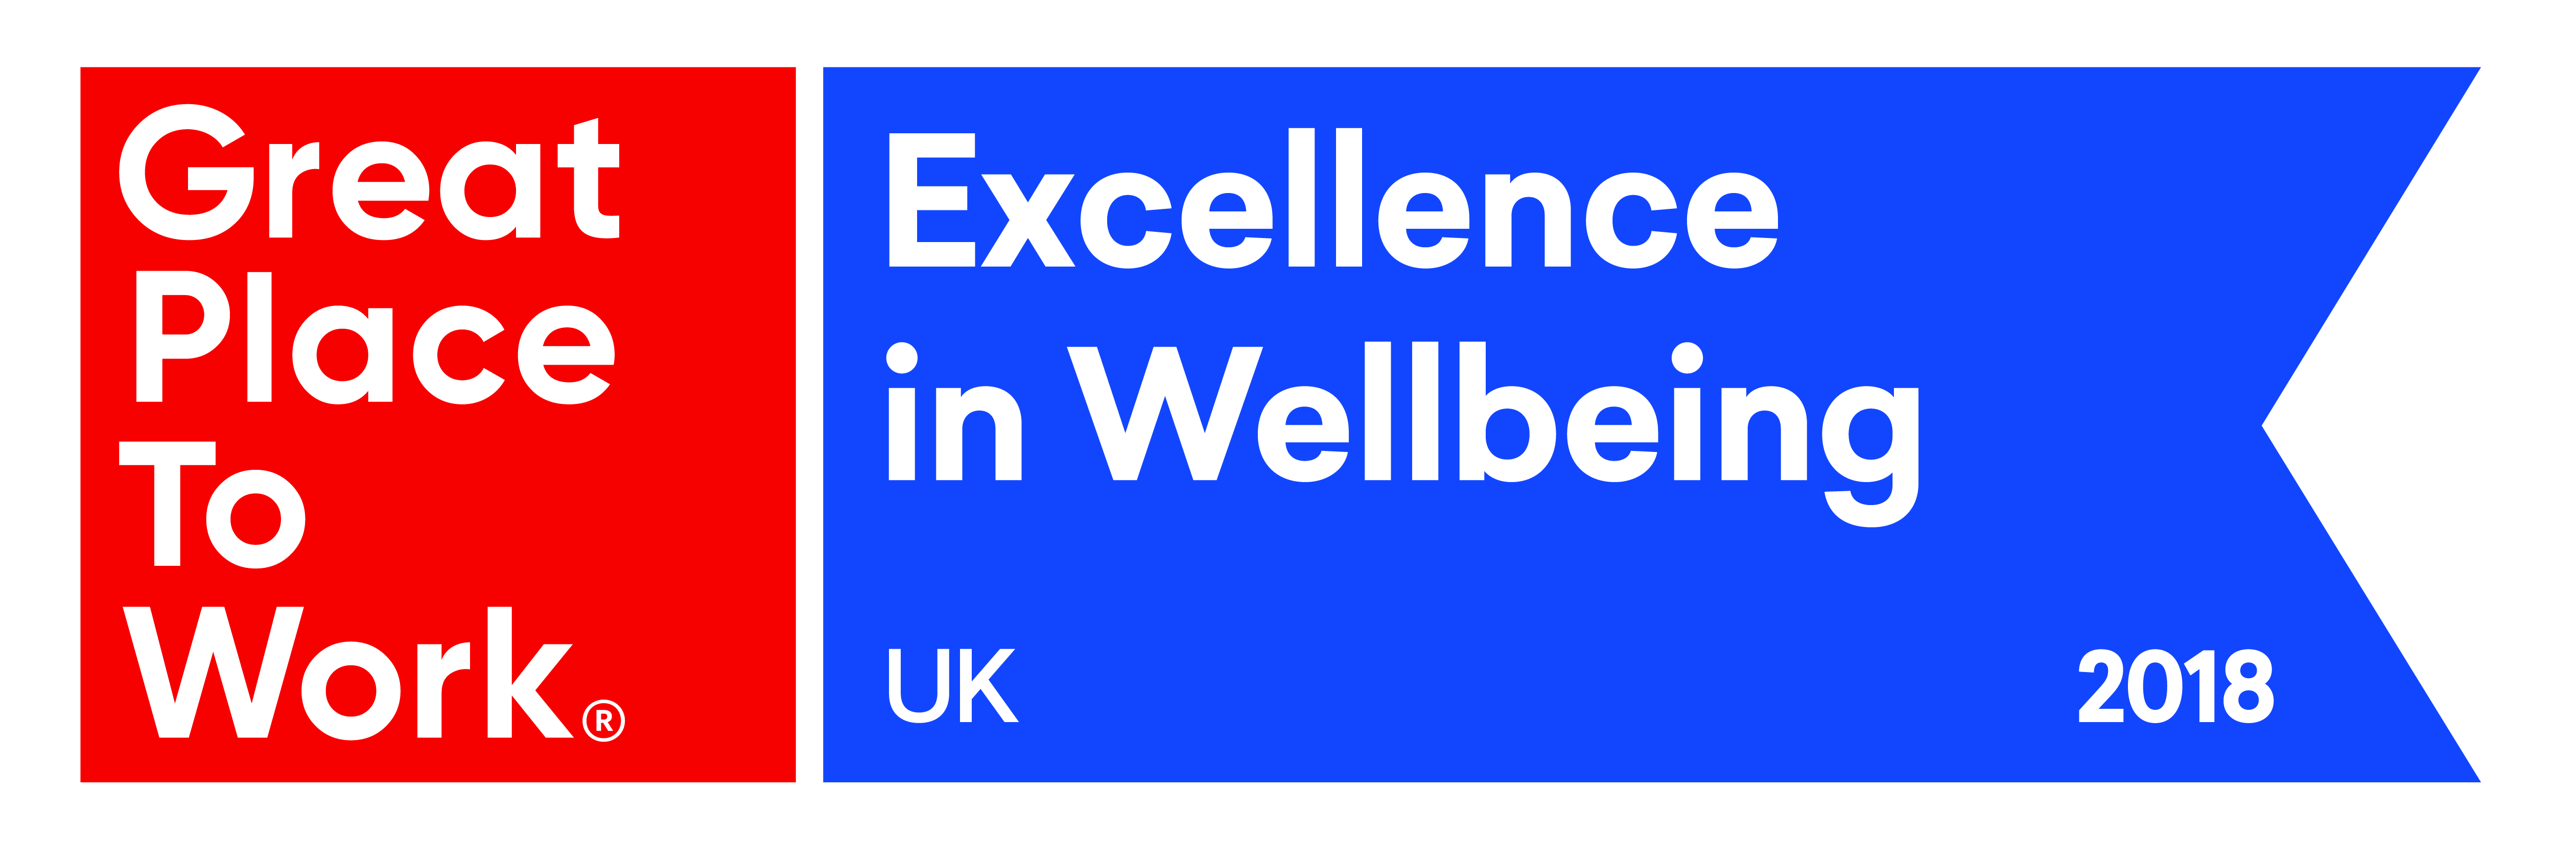 GPTW-Excellence-in-Wellbeing-2018-CMYK-01